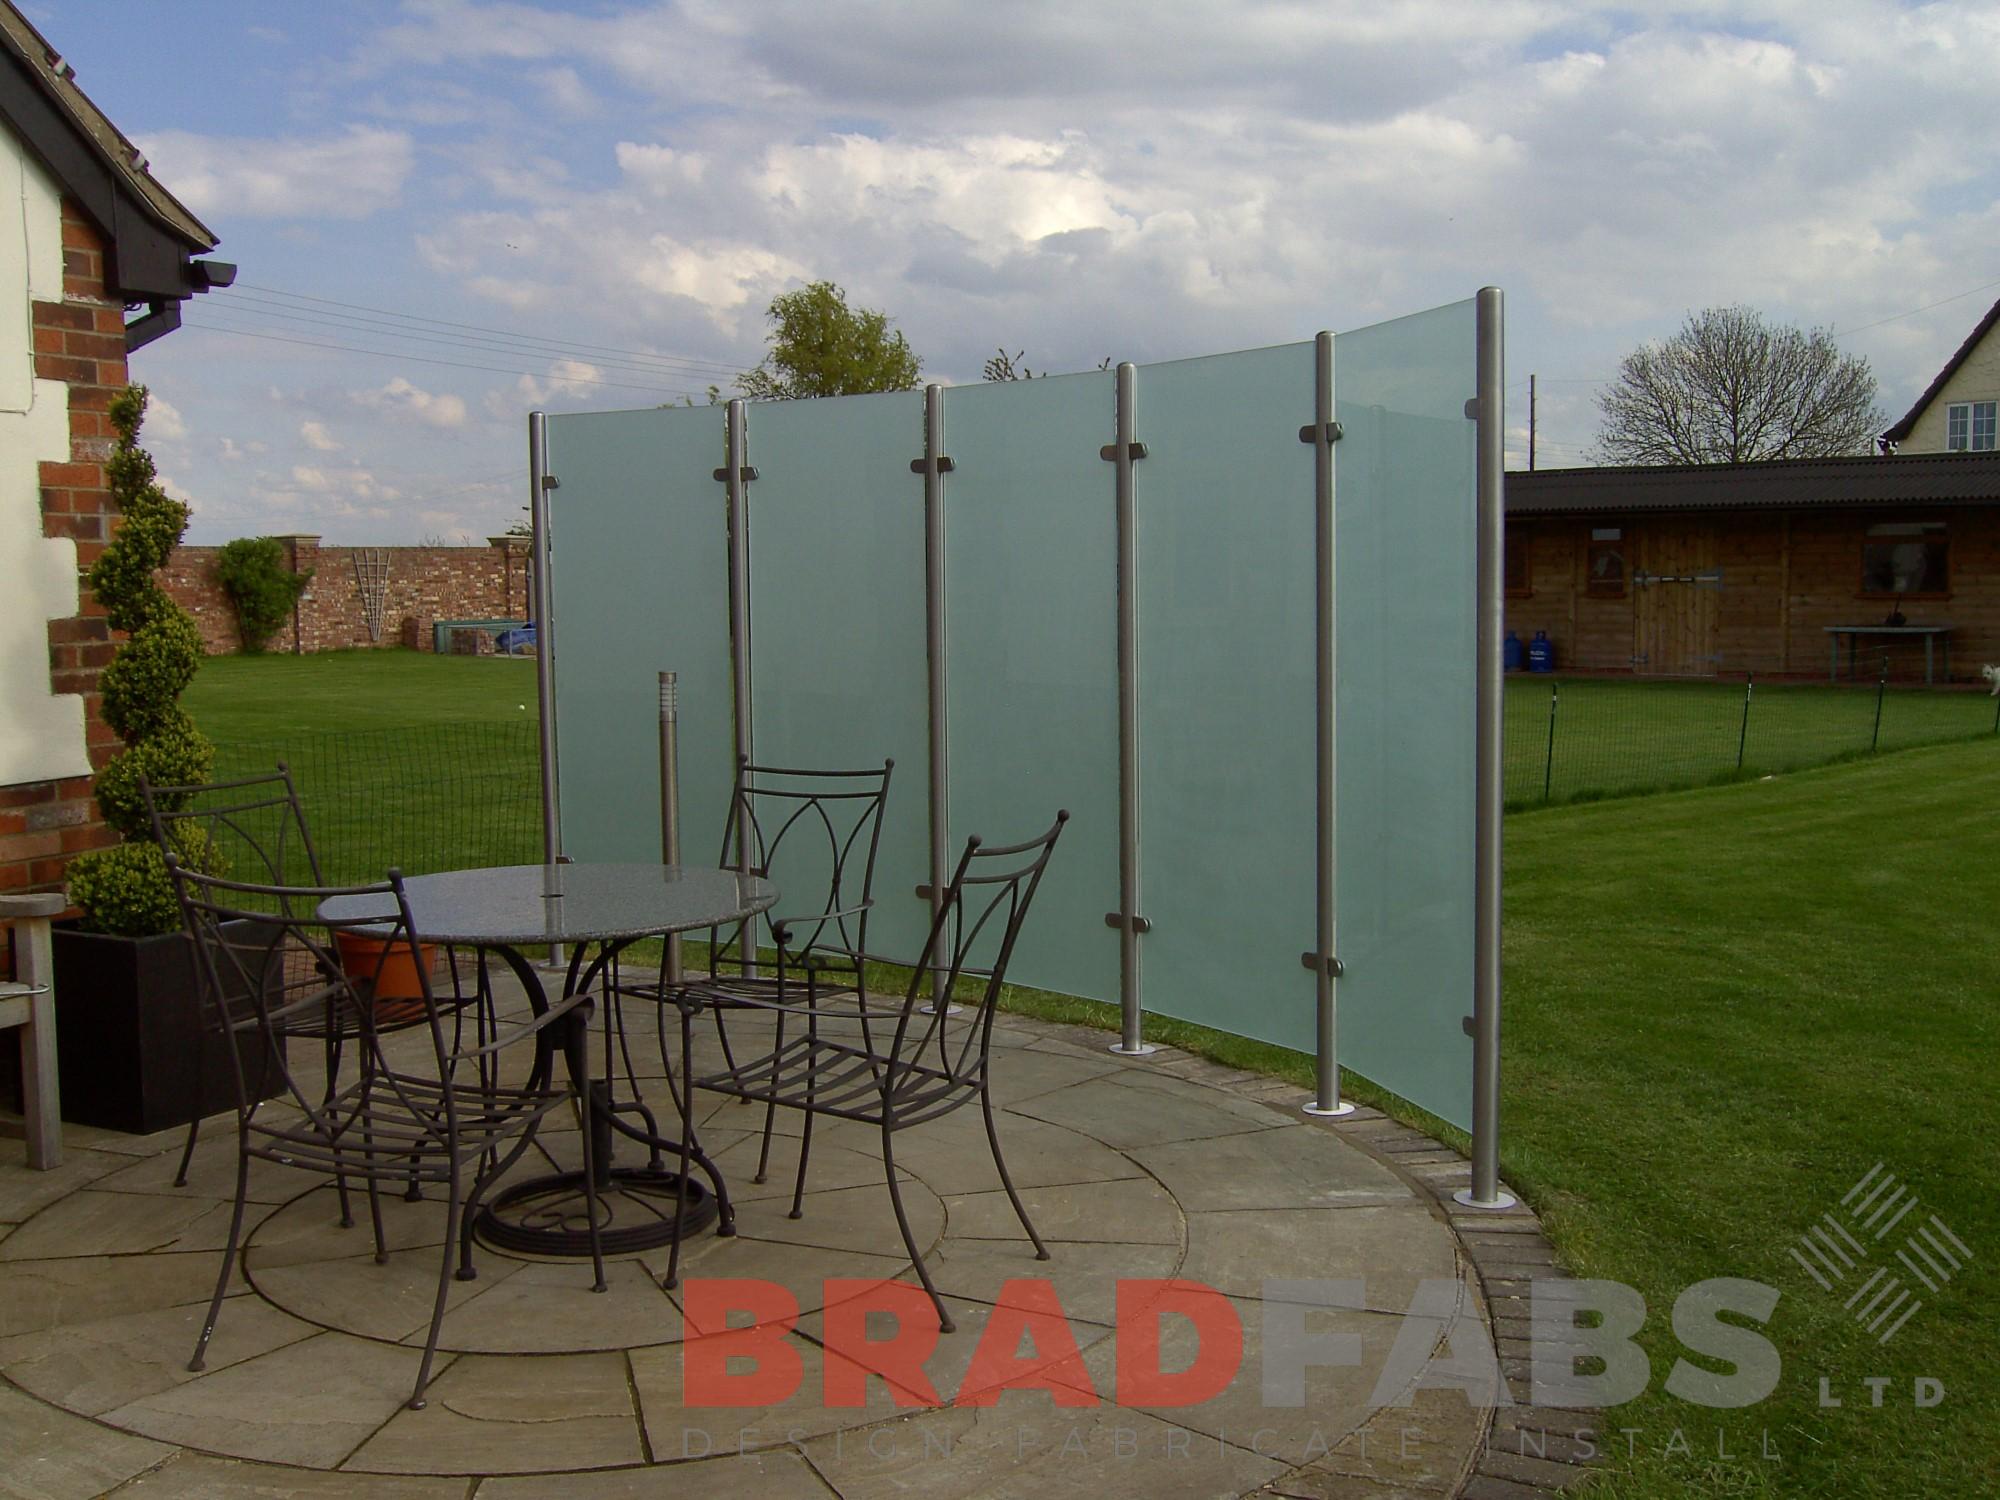 privacy screens fabricated in bradford, frosted glass screens manufactured by bradfabs